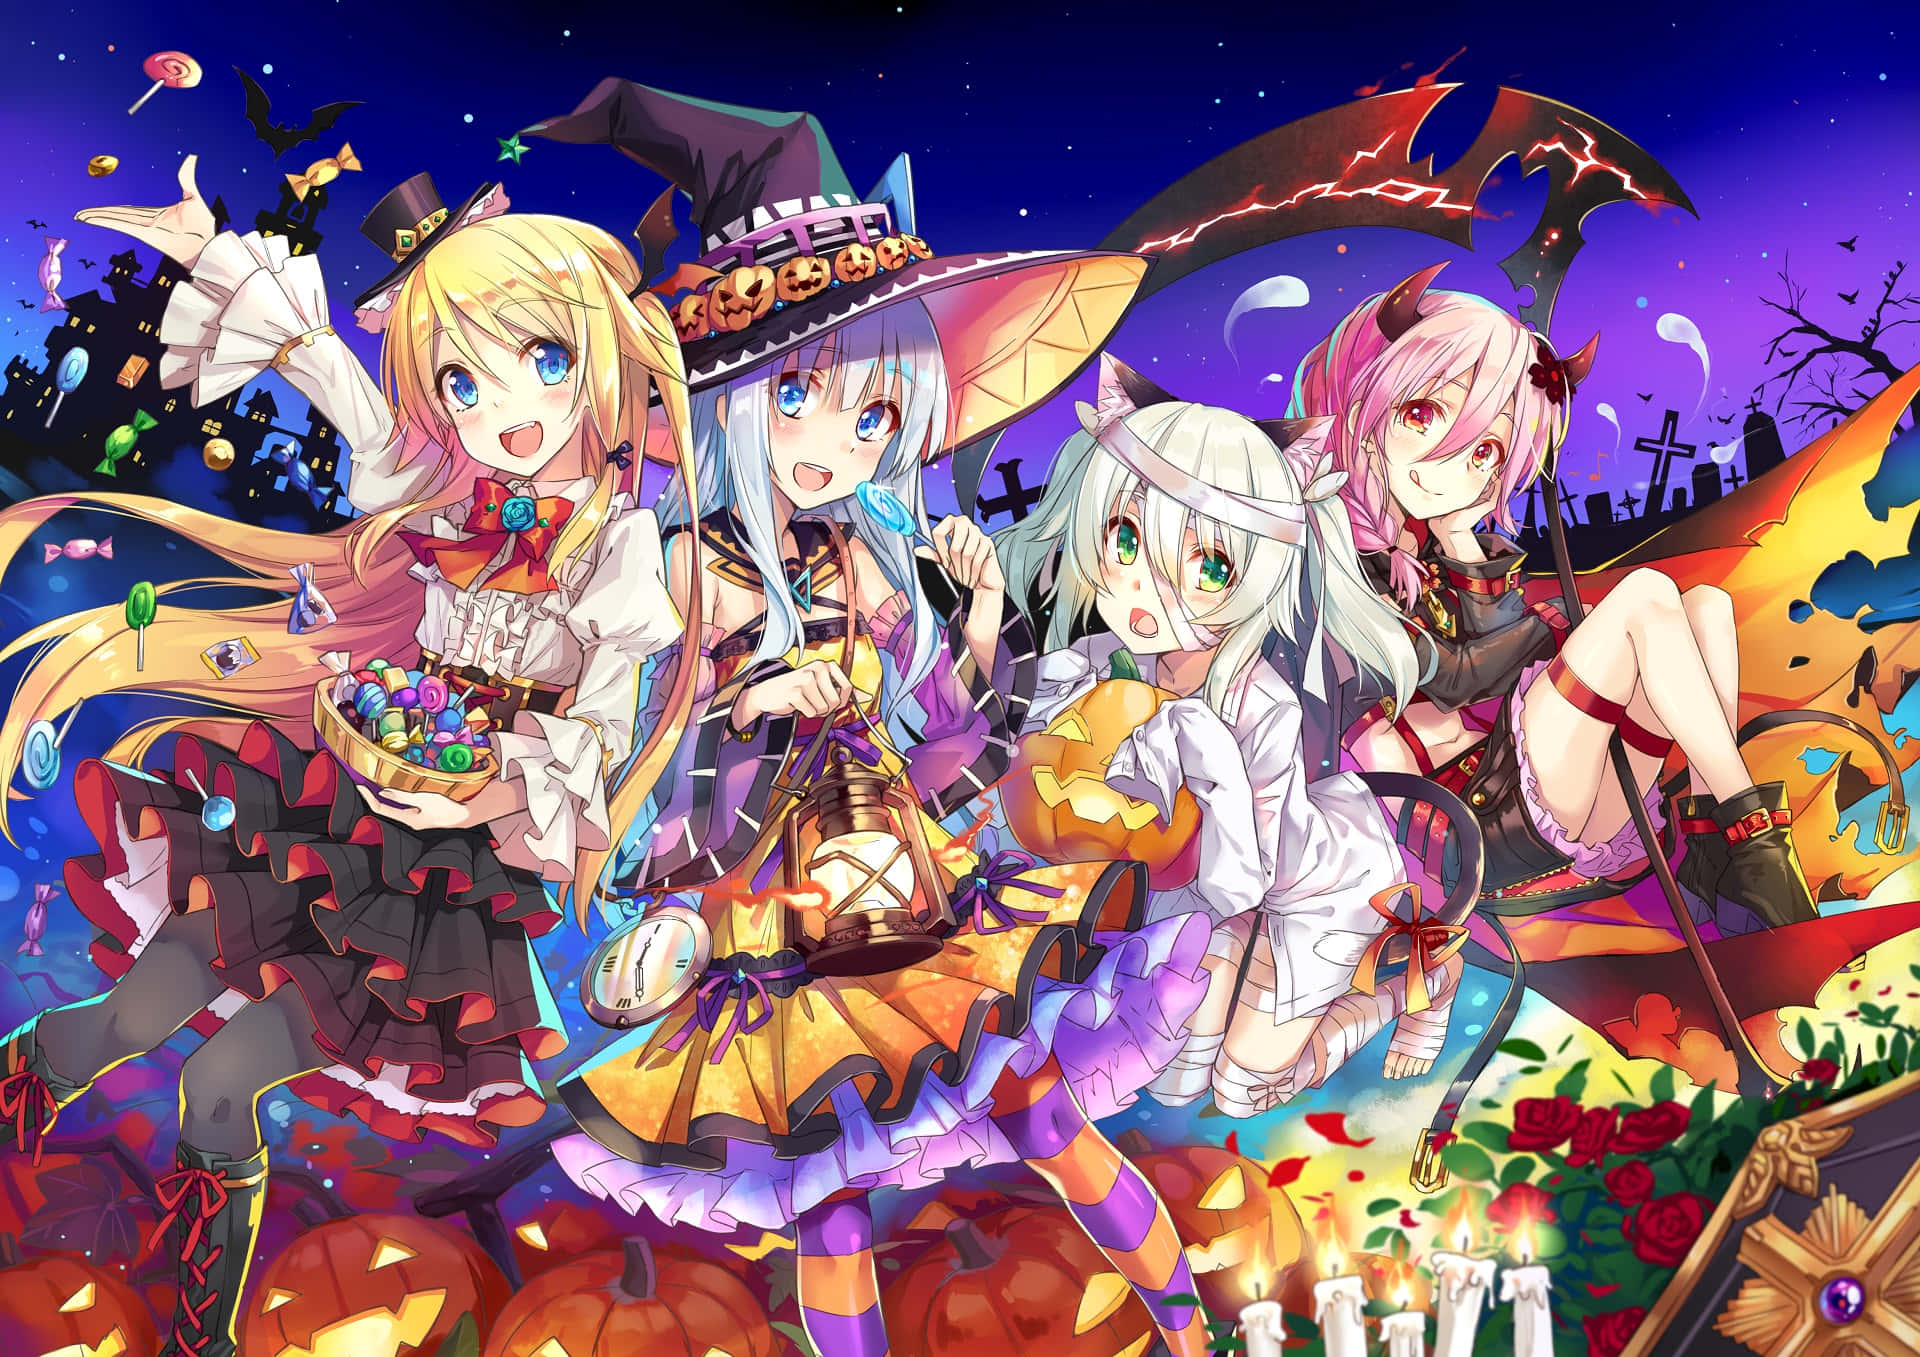 A collection of Witch Hats on display Wallpaper